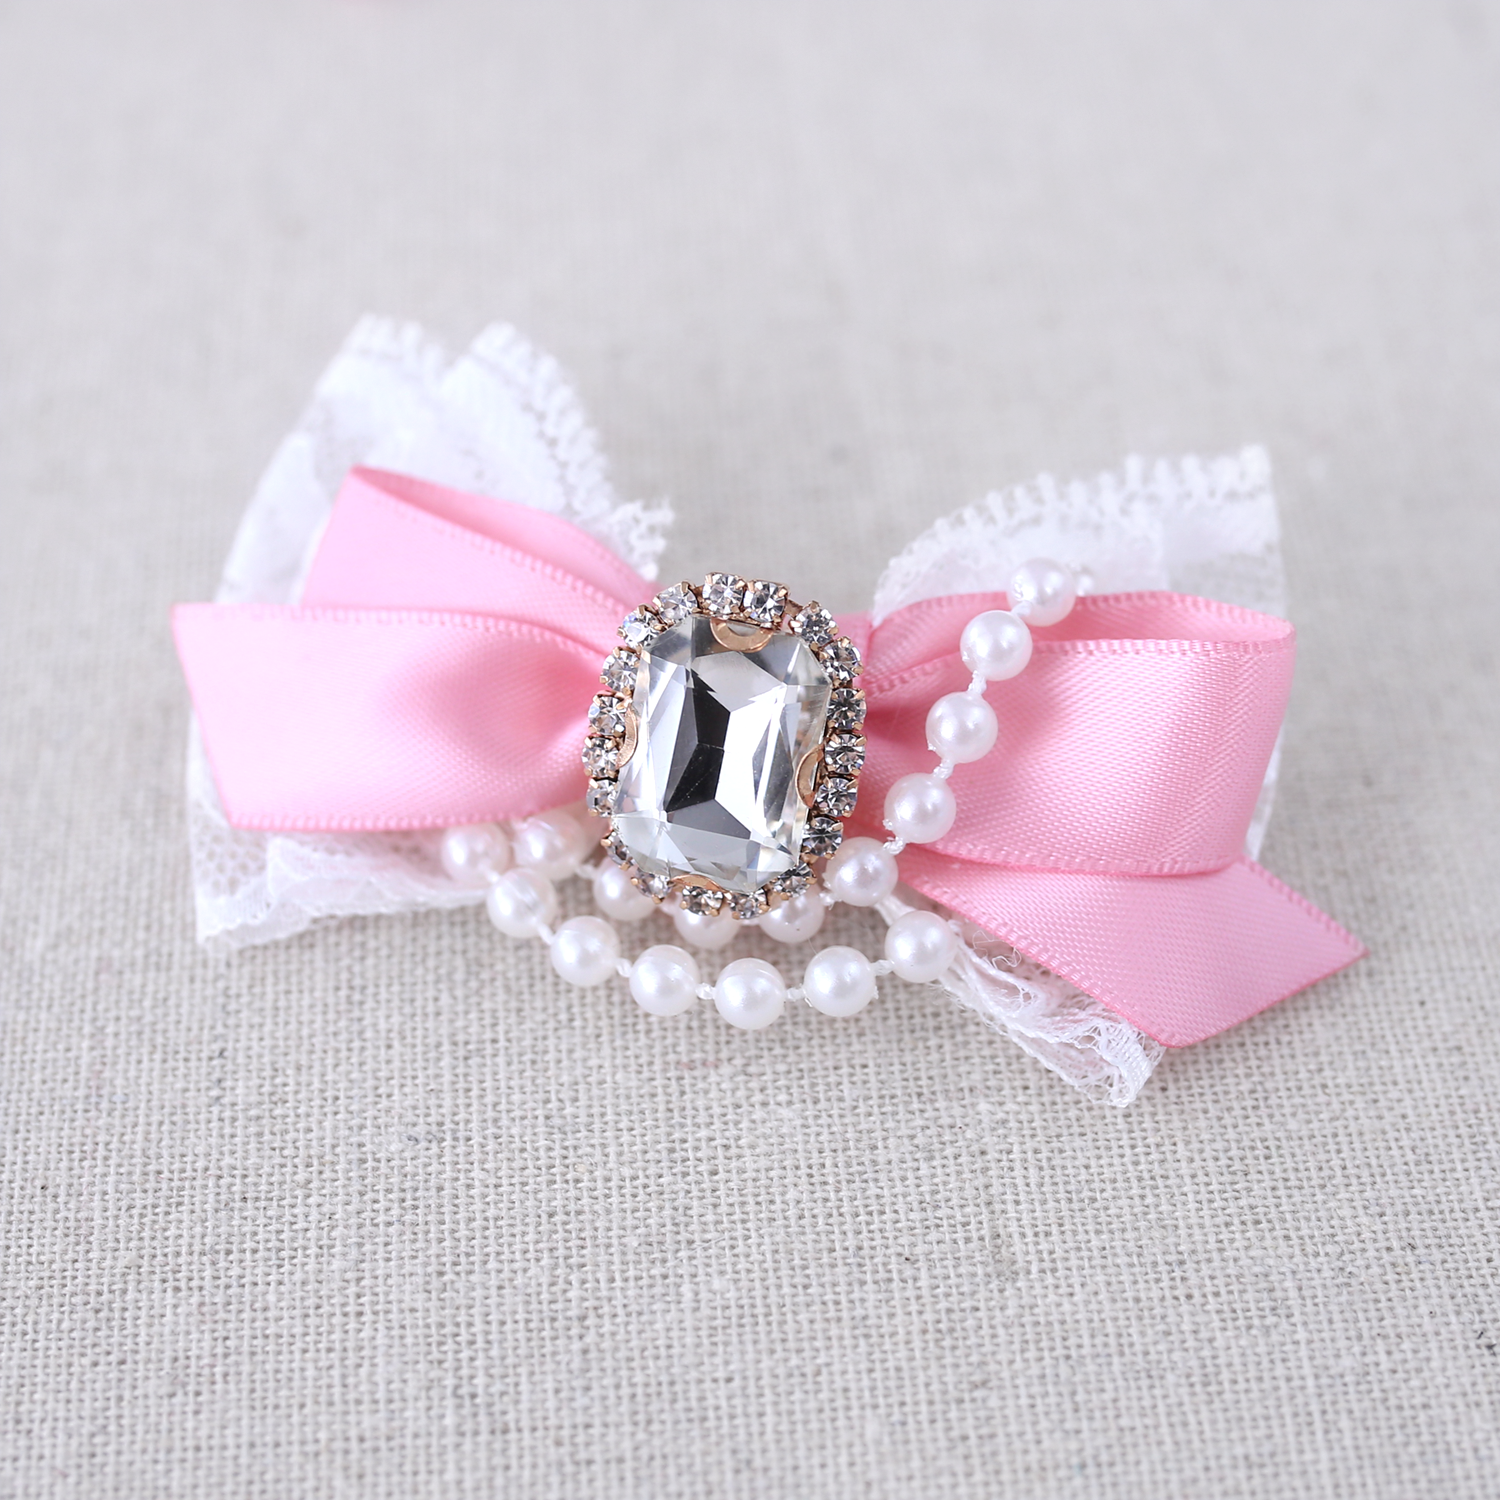 Dog Bows - Pink Princess For A Day Hair Bow by Wooflink